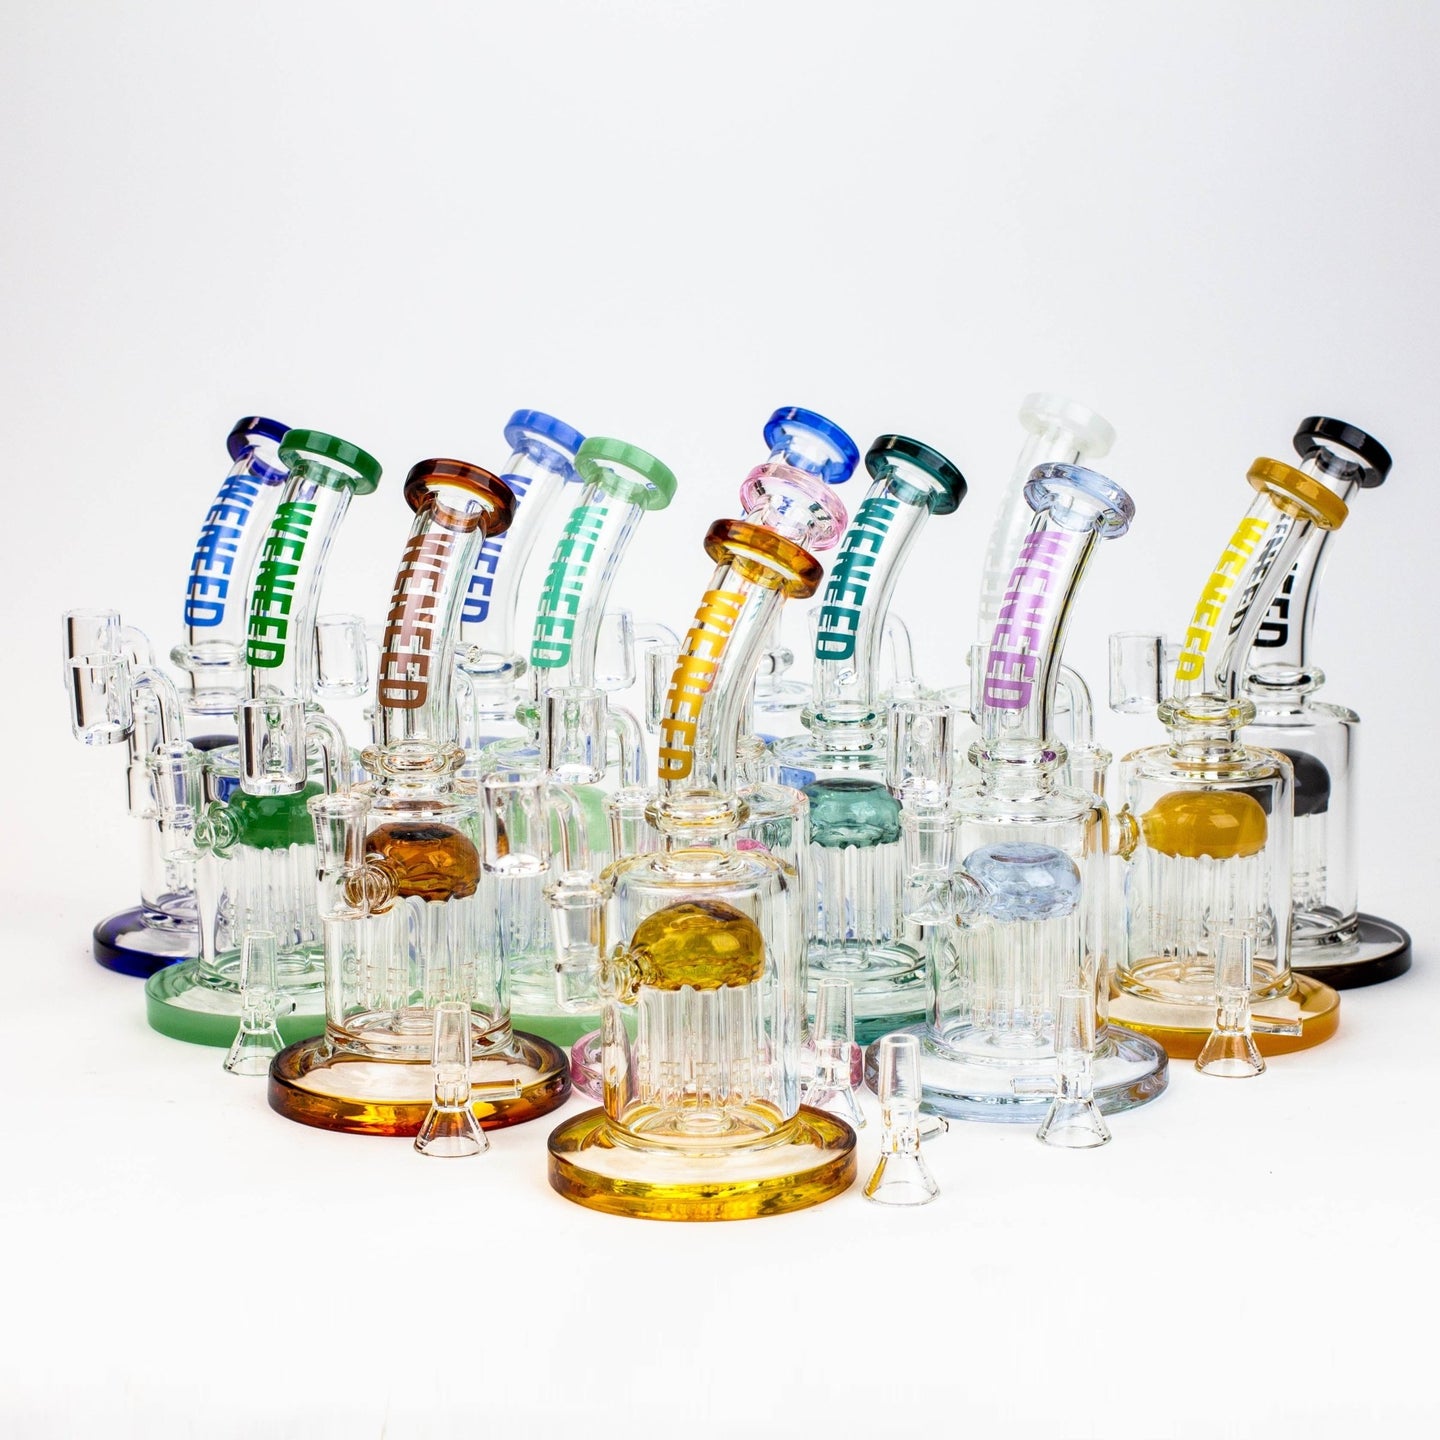 WENEED®-10" 2-in-1 Tree Perc Water Bong/Rig - Glasss Station